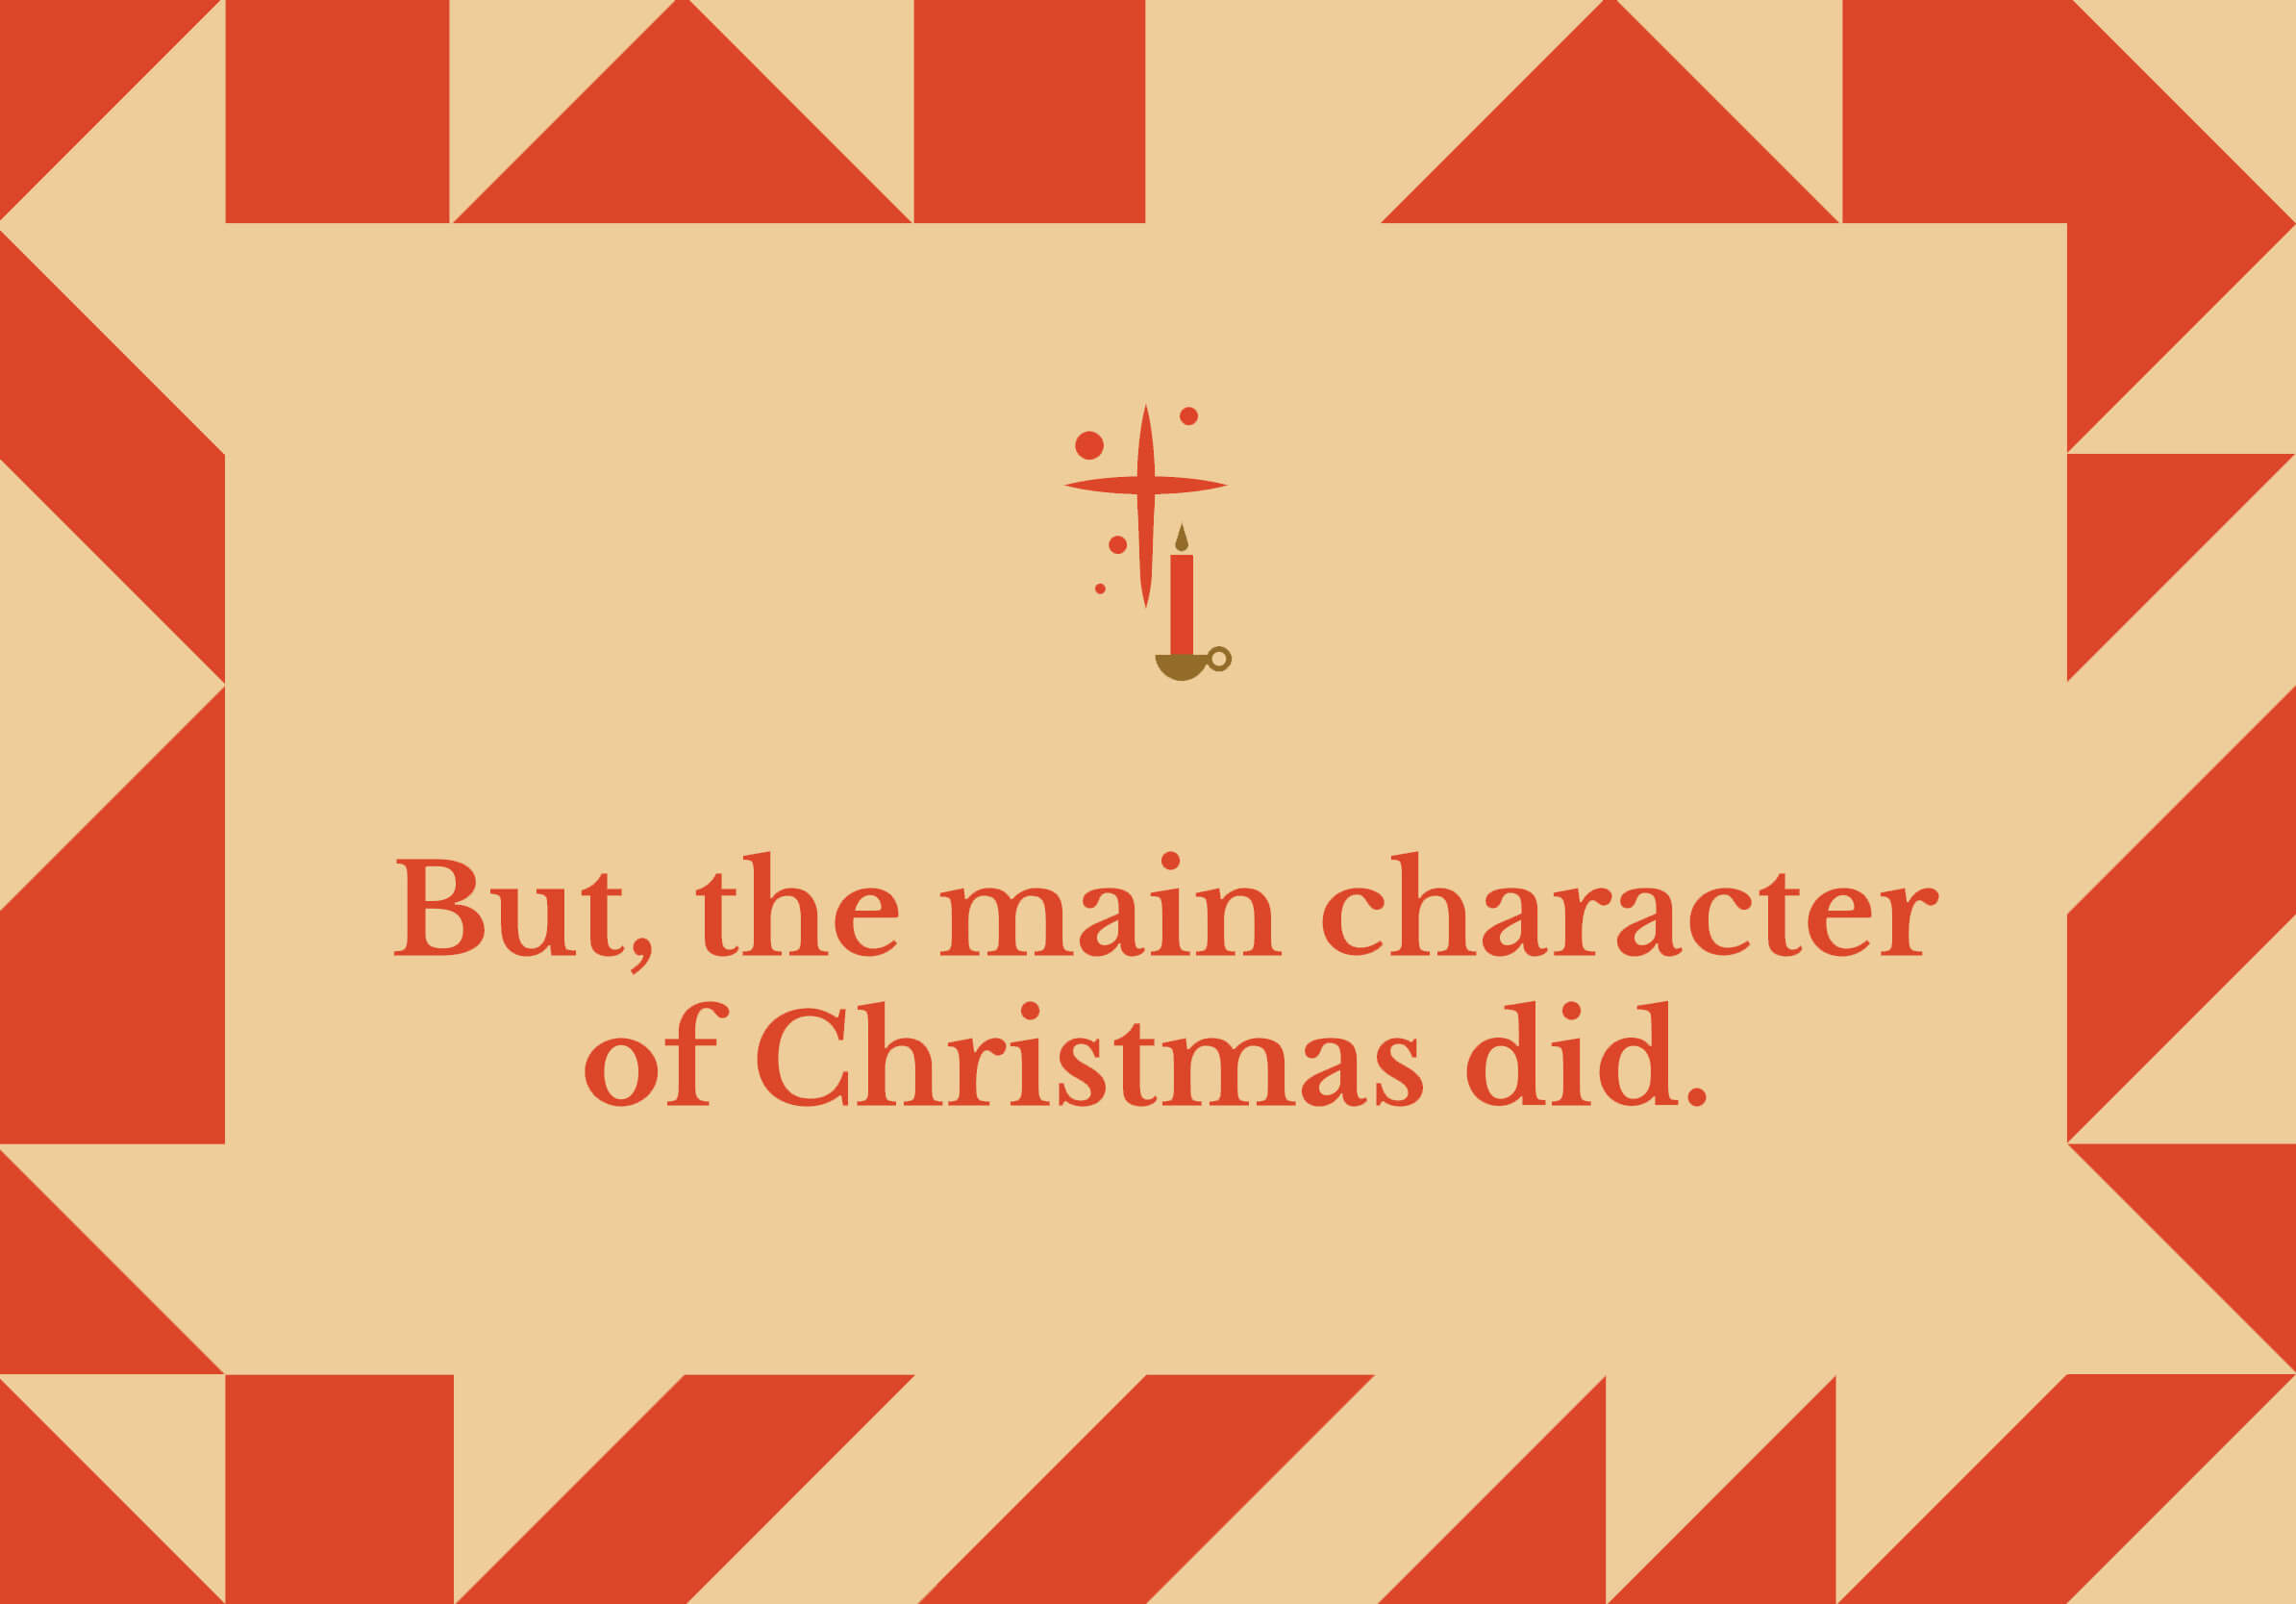 But, the main character of Christmas did.